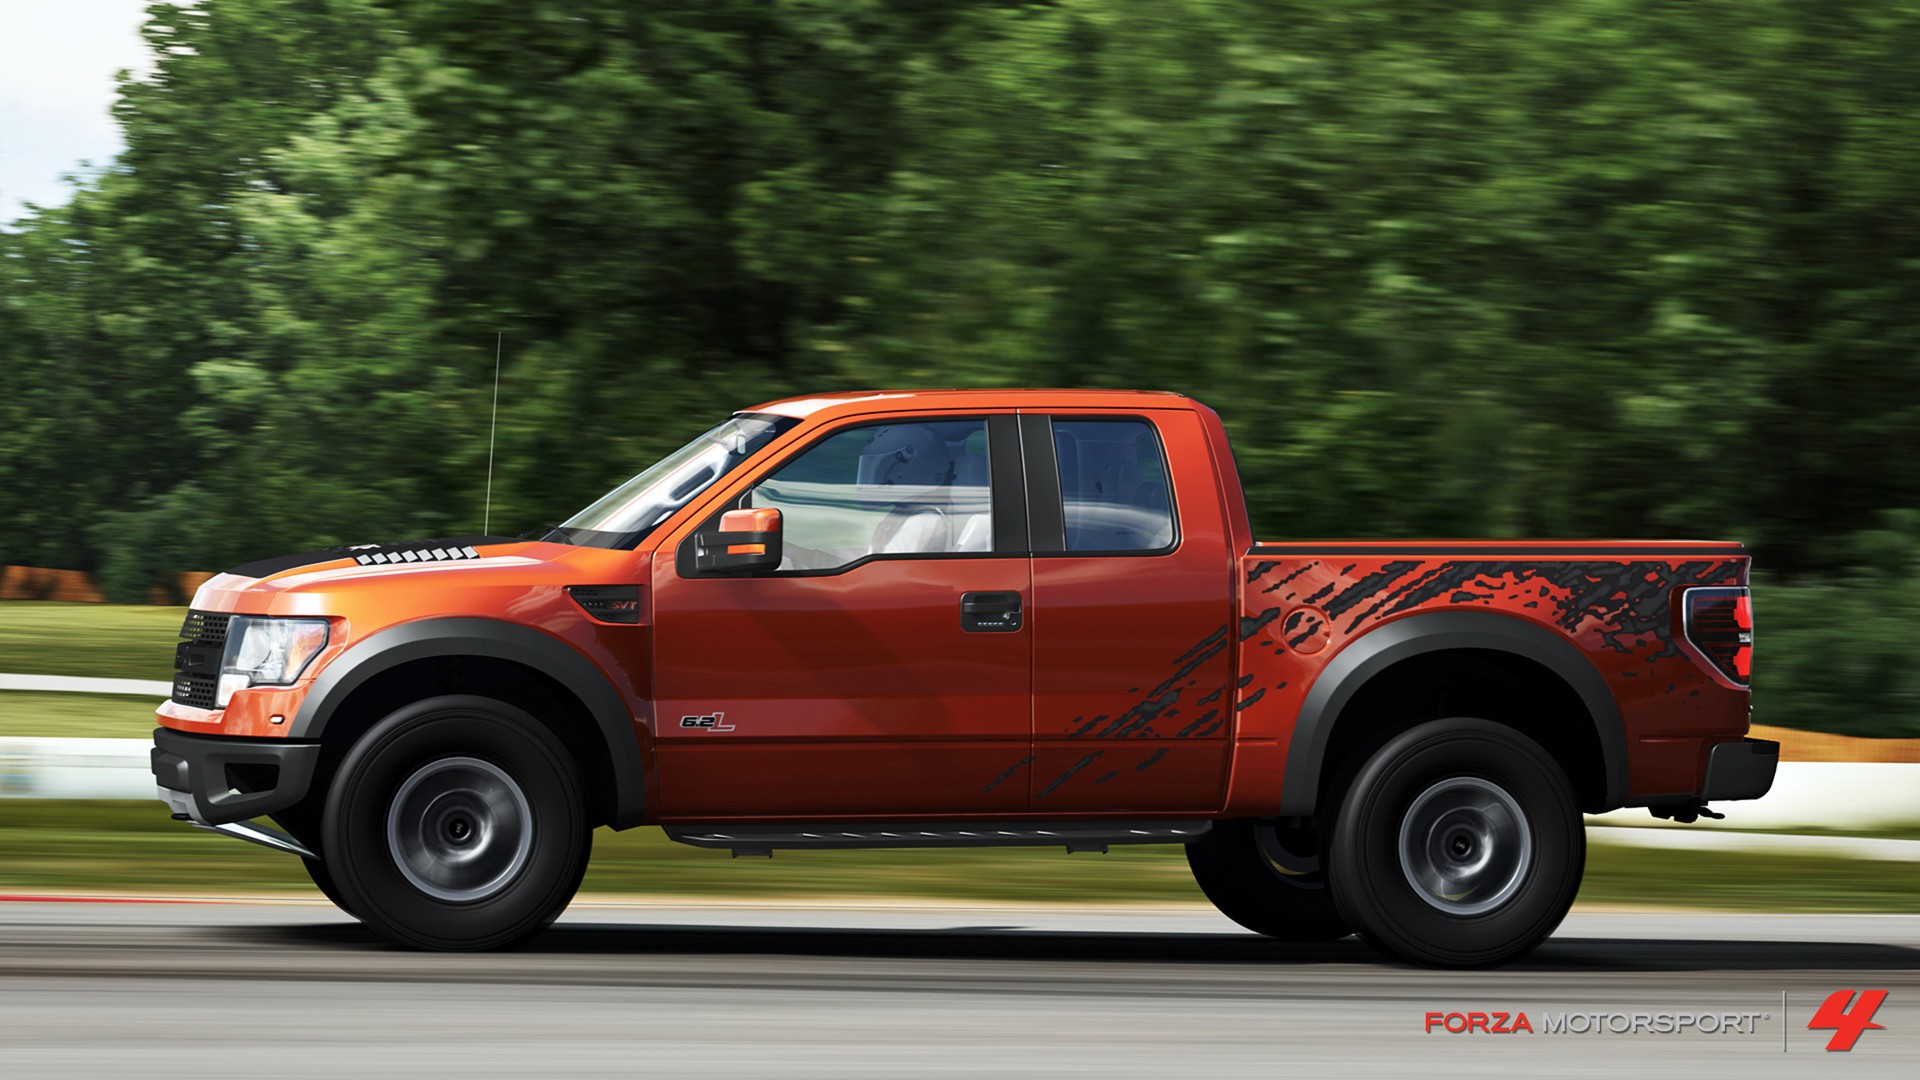 Free photo Ford pickup truck in the game forza motorsport 4